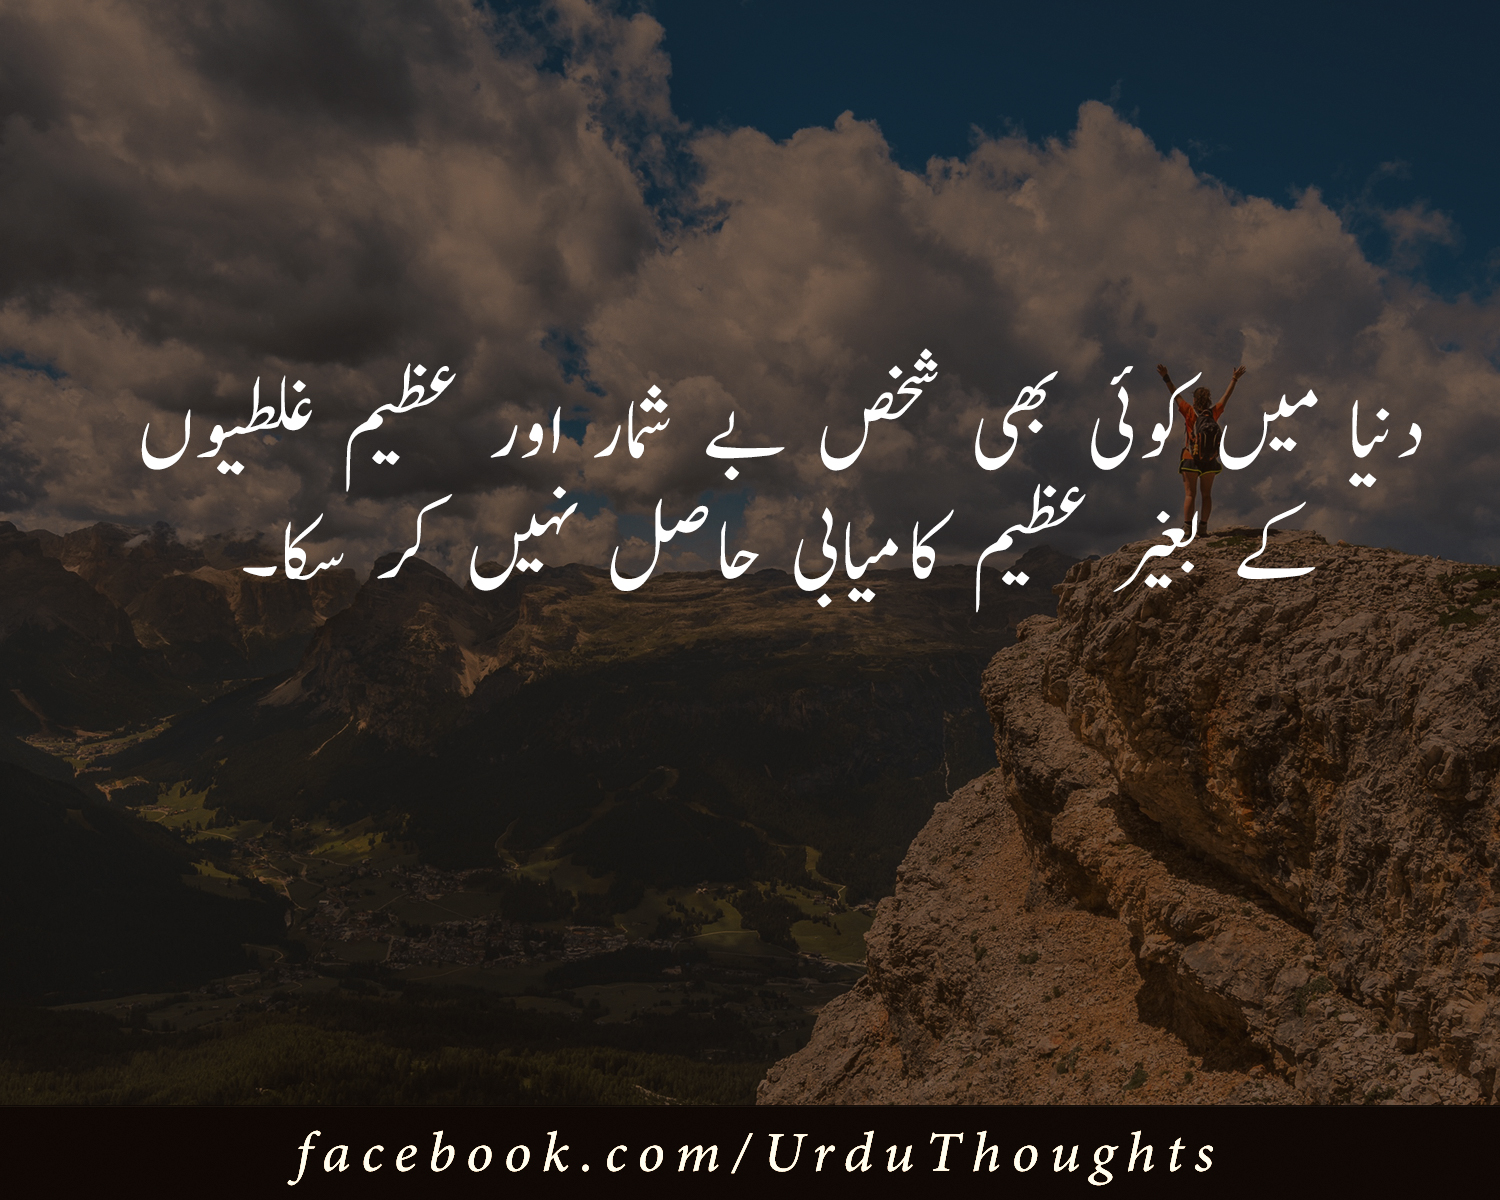 to your friends great quotes about success in Urdu famous quotes on success in Urdu life success quotes in Urdu success quotes for students in Urdu